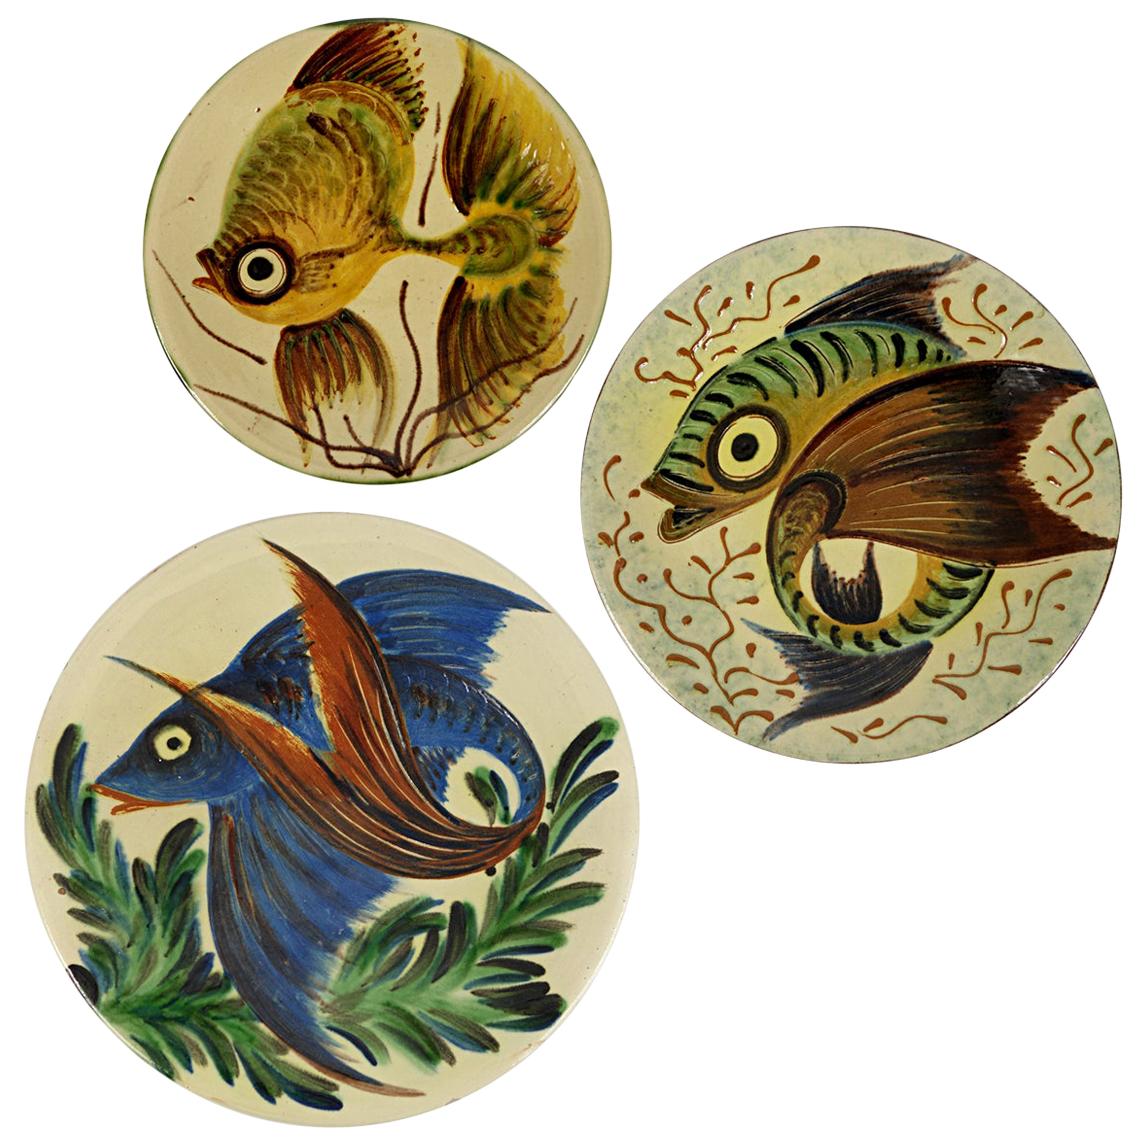 Set of 3 Ceramic Wall Plates with Fish Decor Signed by Spanish Maker Puigdemont